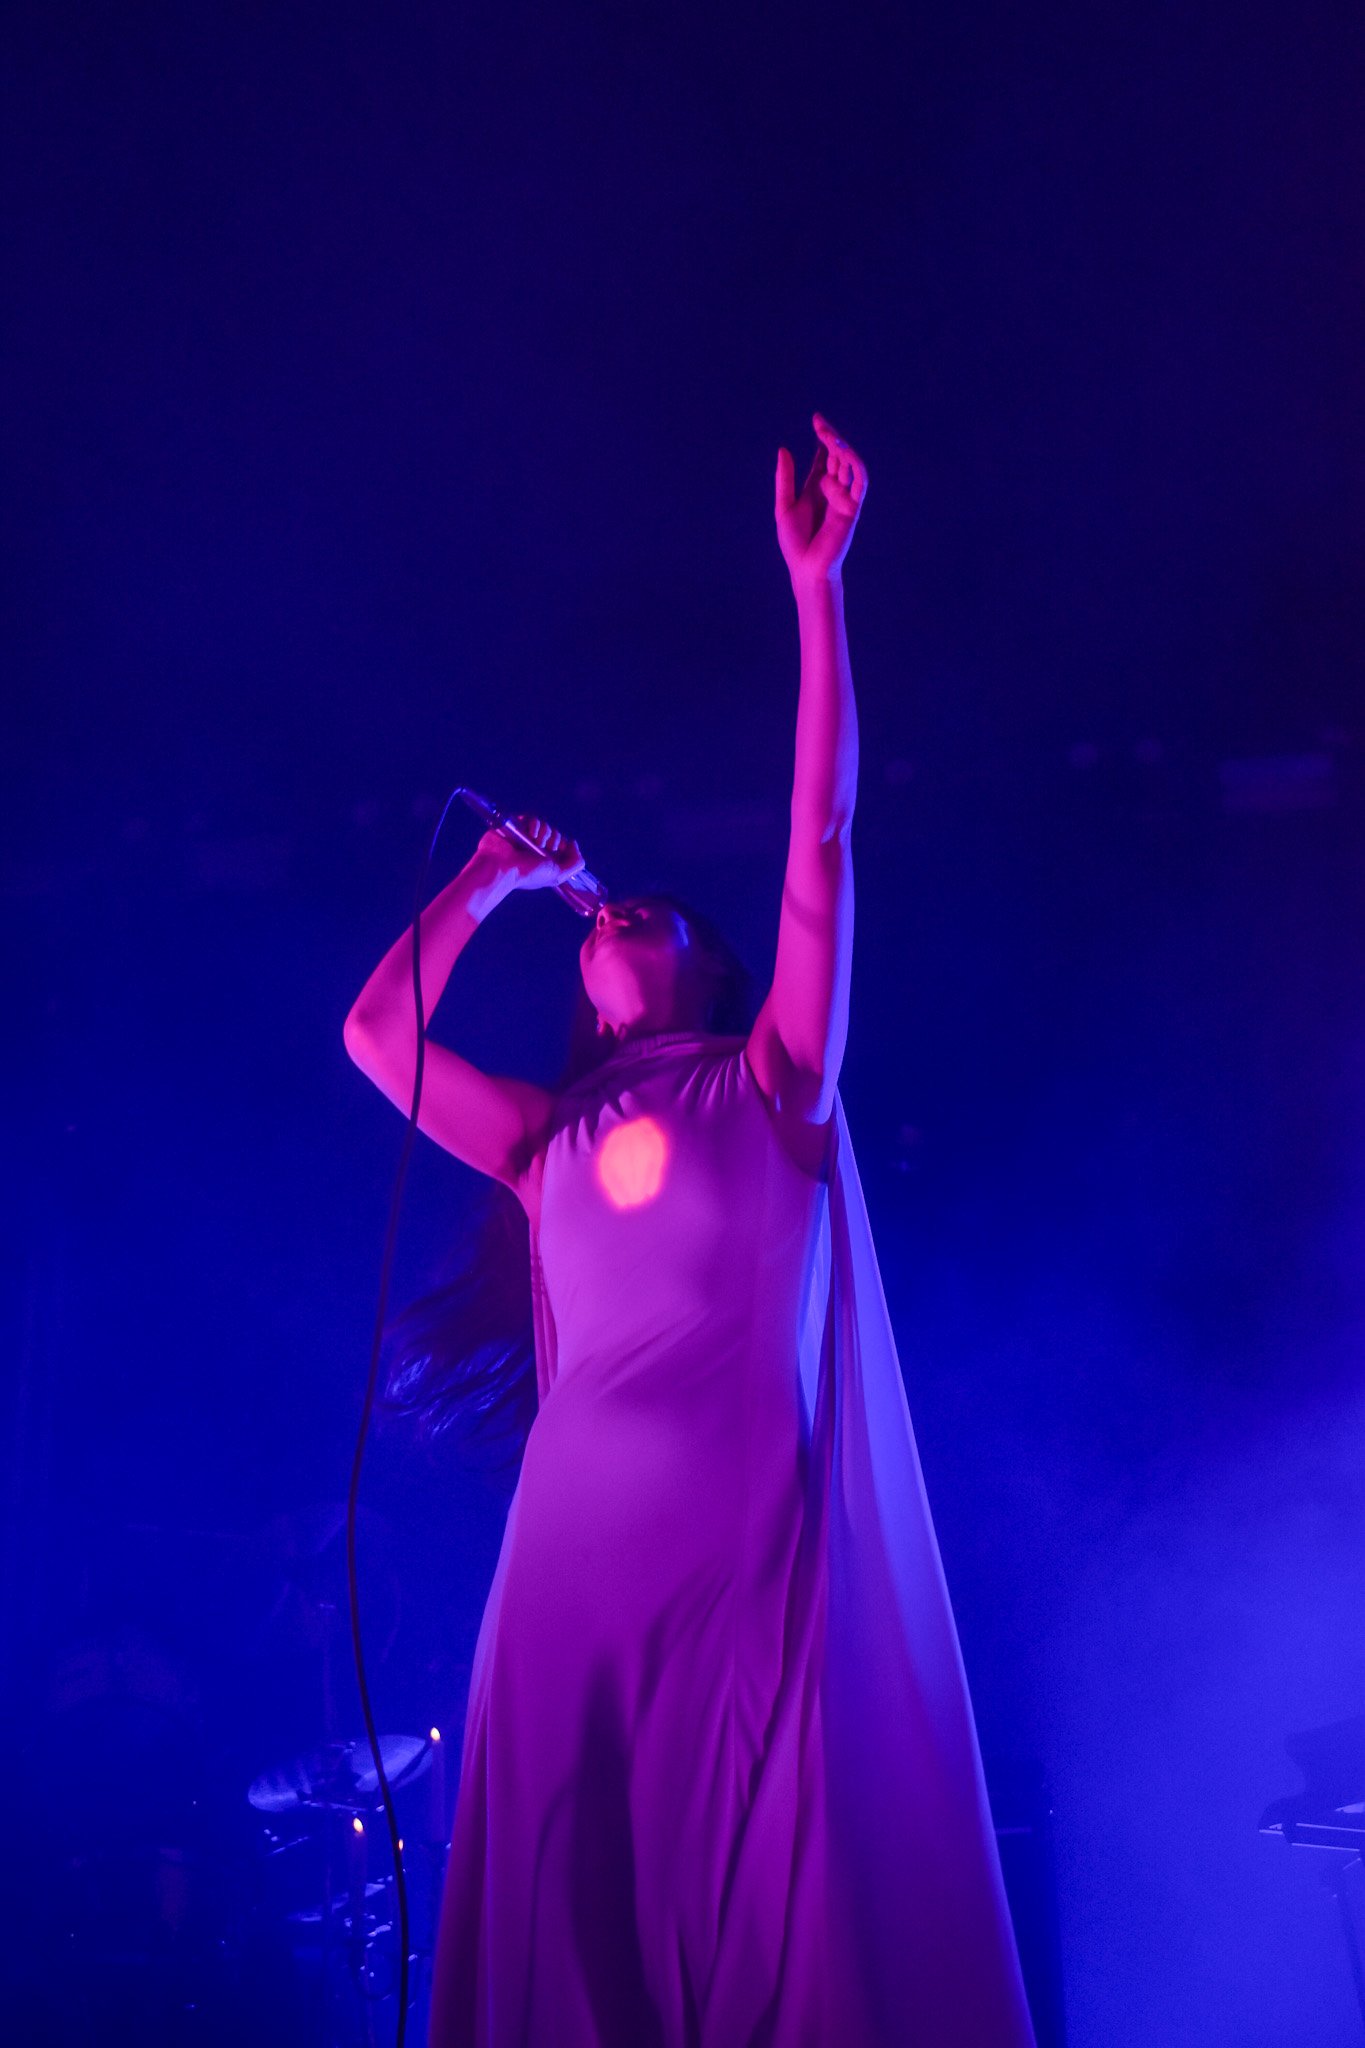  As Weyes Blood performs “Twin Flame,” she waves her cloak gracefully, revealing a glowing heart beneath her dress. 